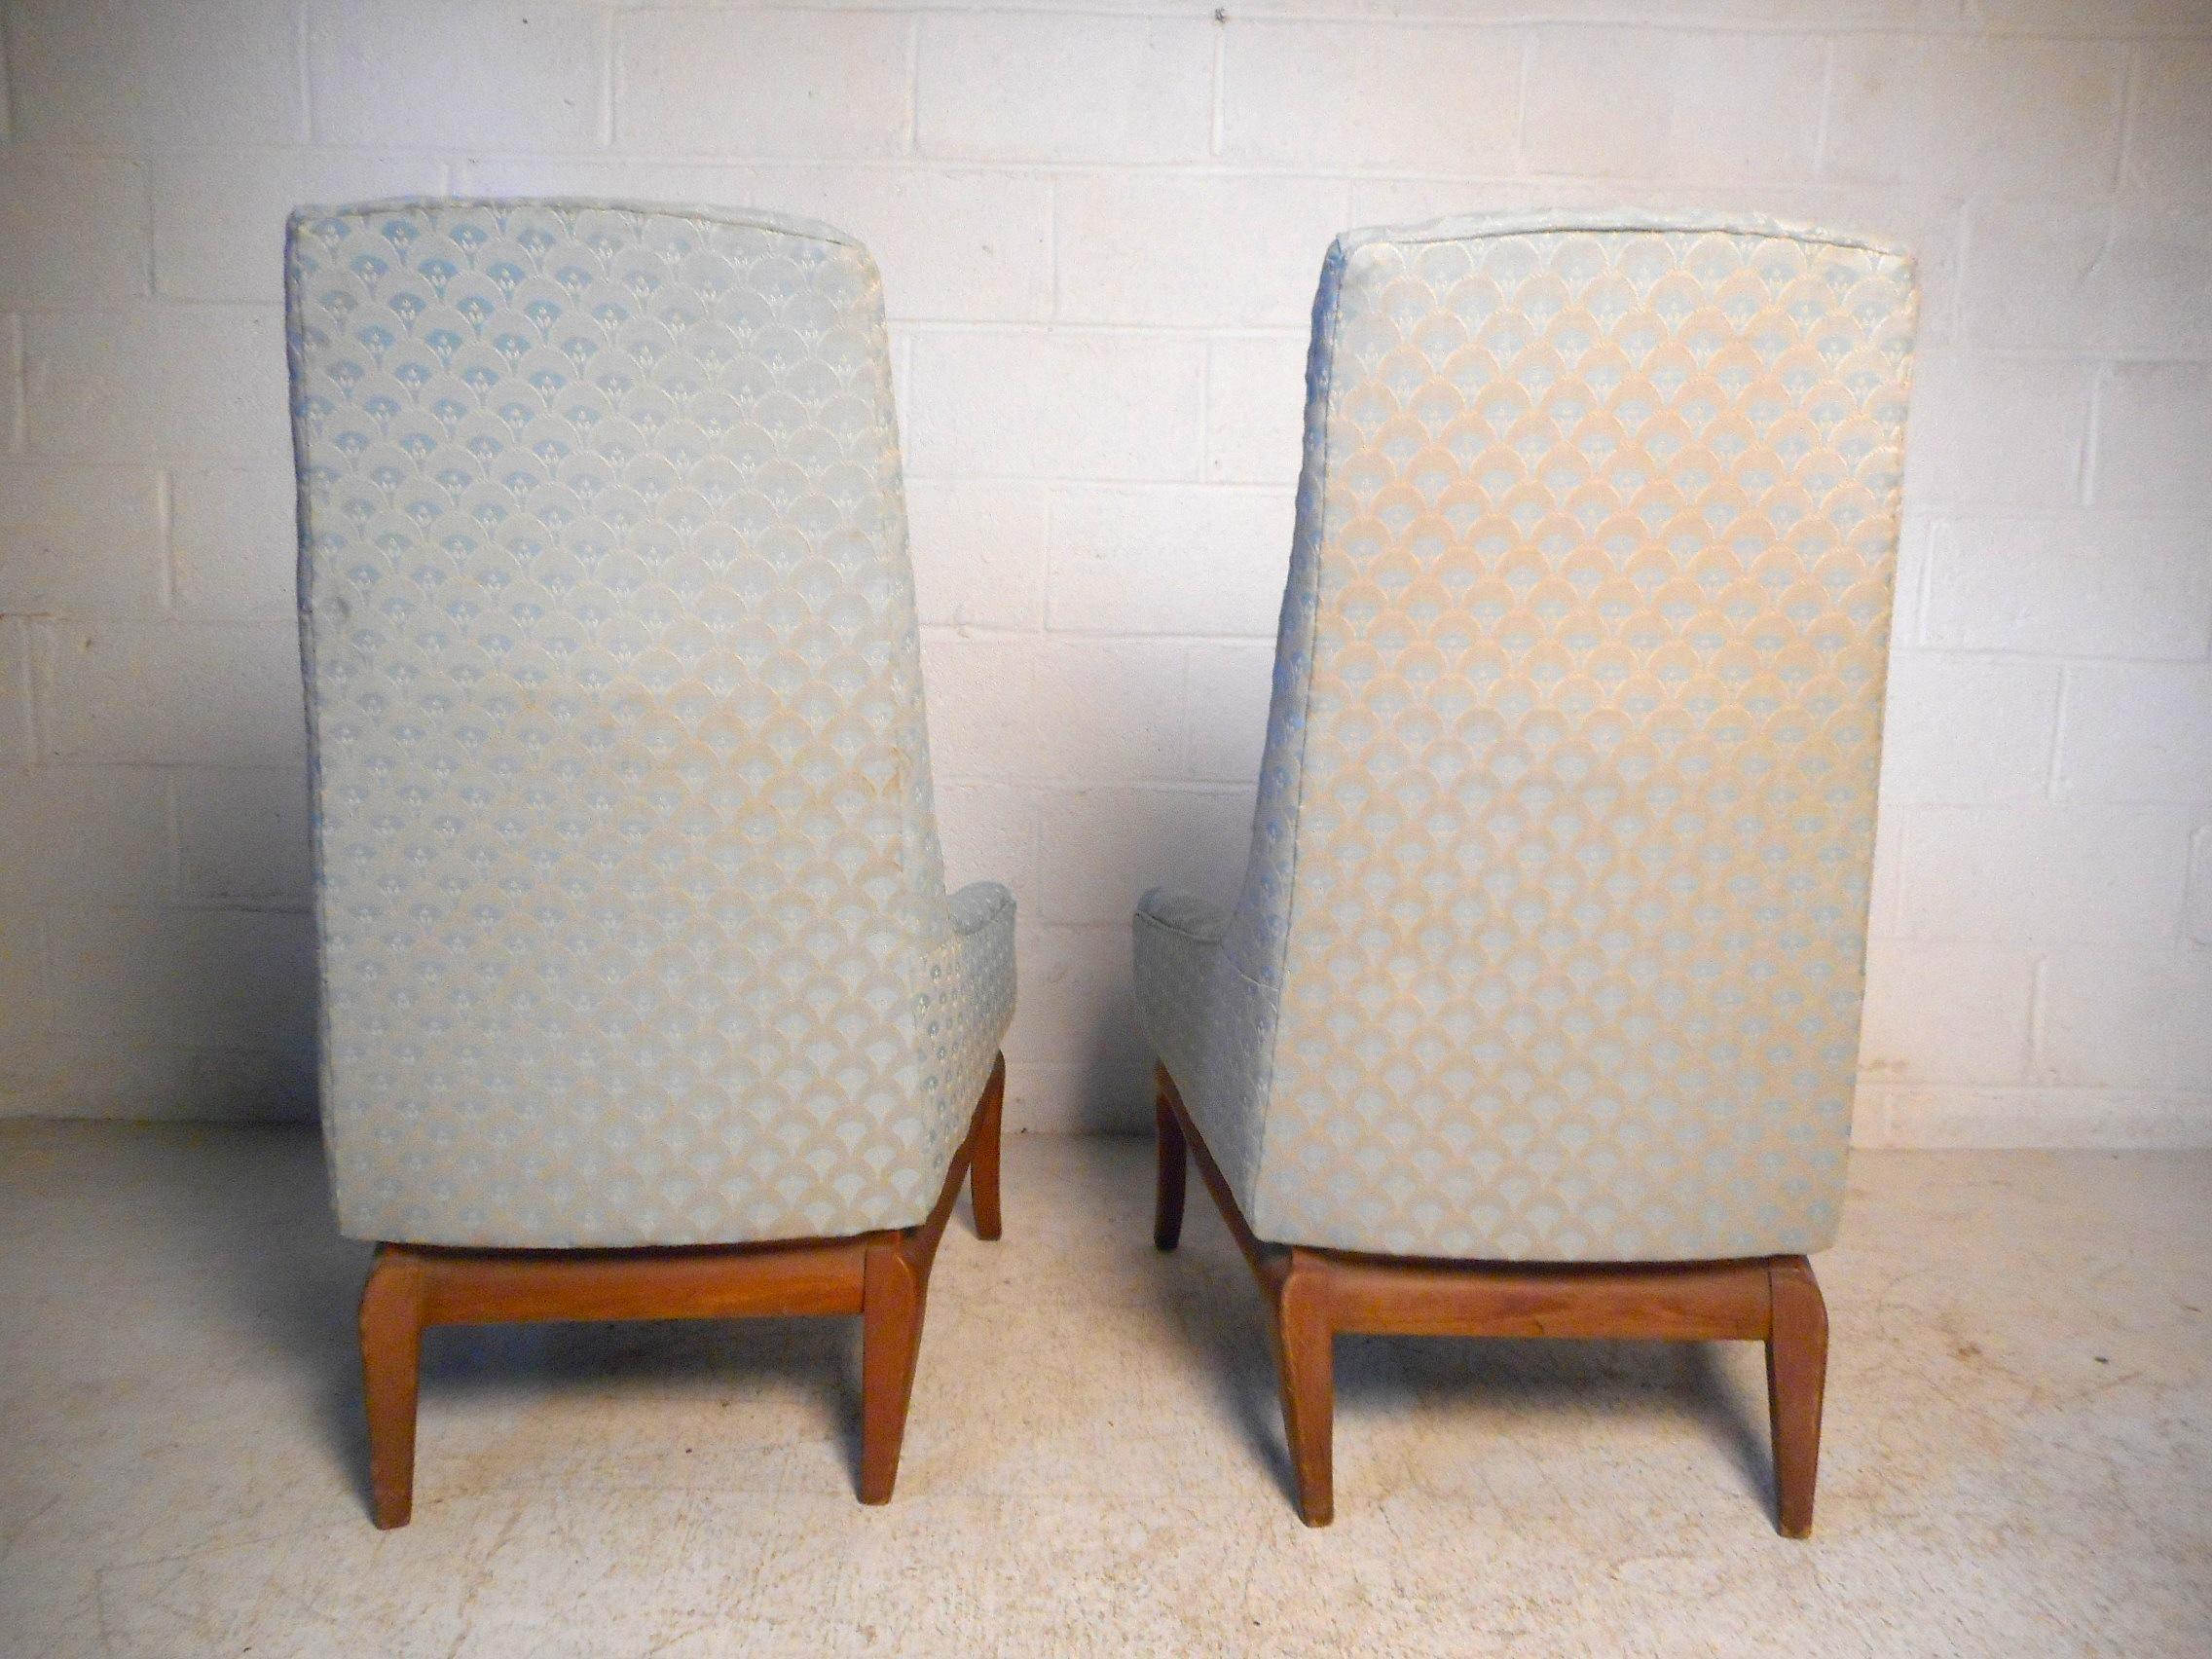 Late 20th Century Pair of Midcentury High-Back Chairs after Pearsall For Sale